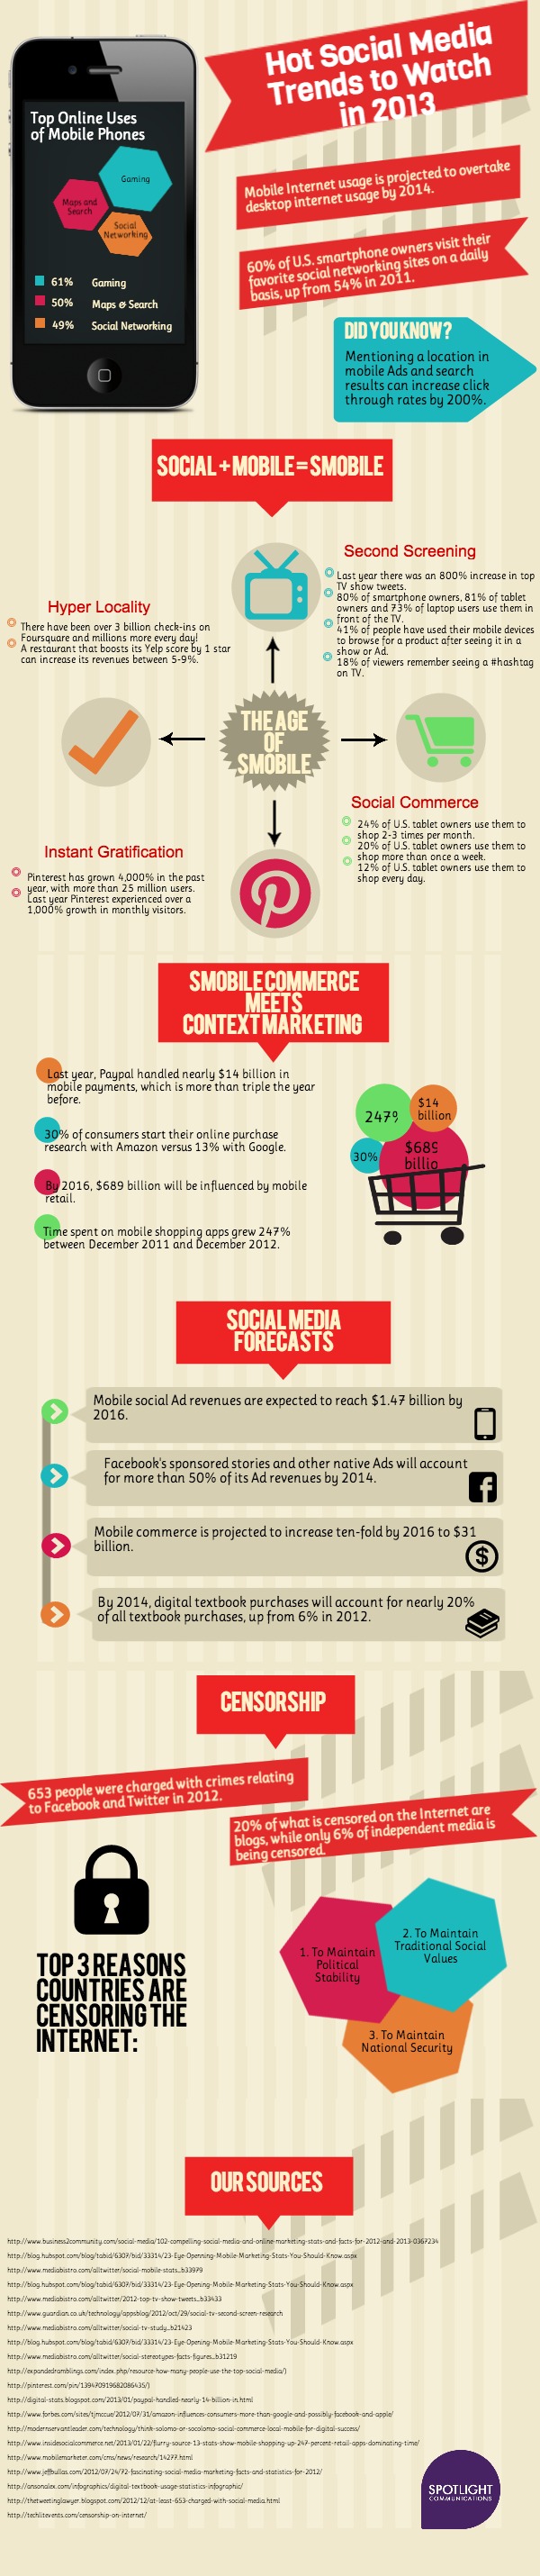 Hot Social Media Trends to Watch in 2013